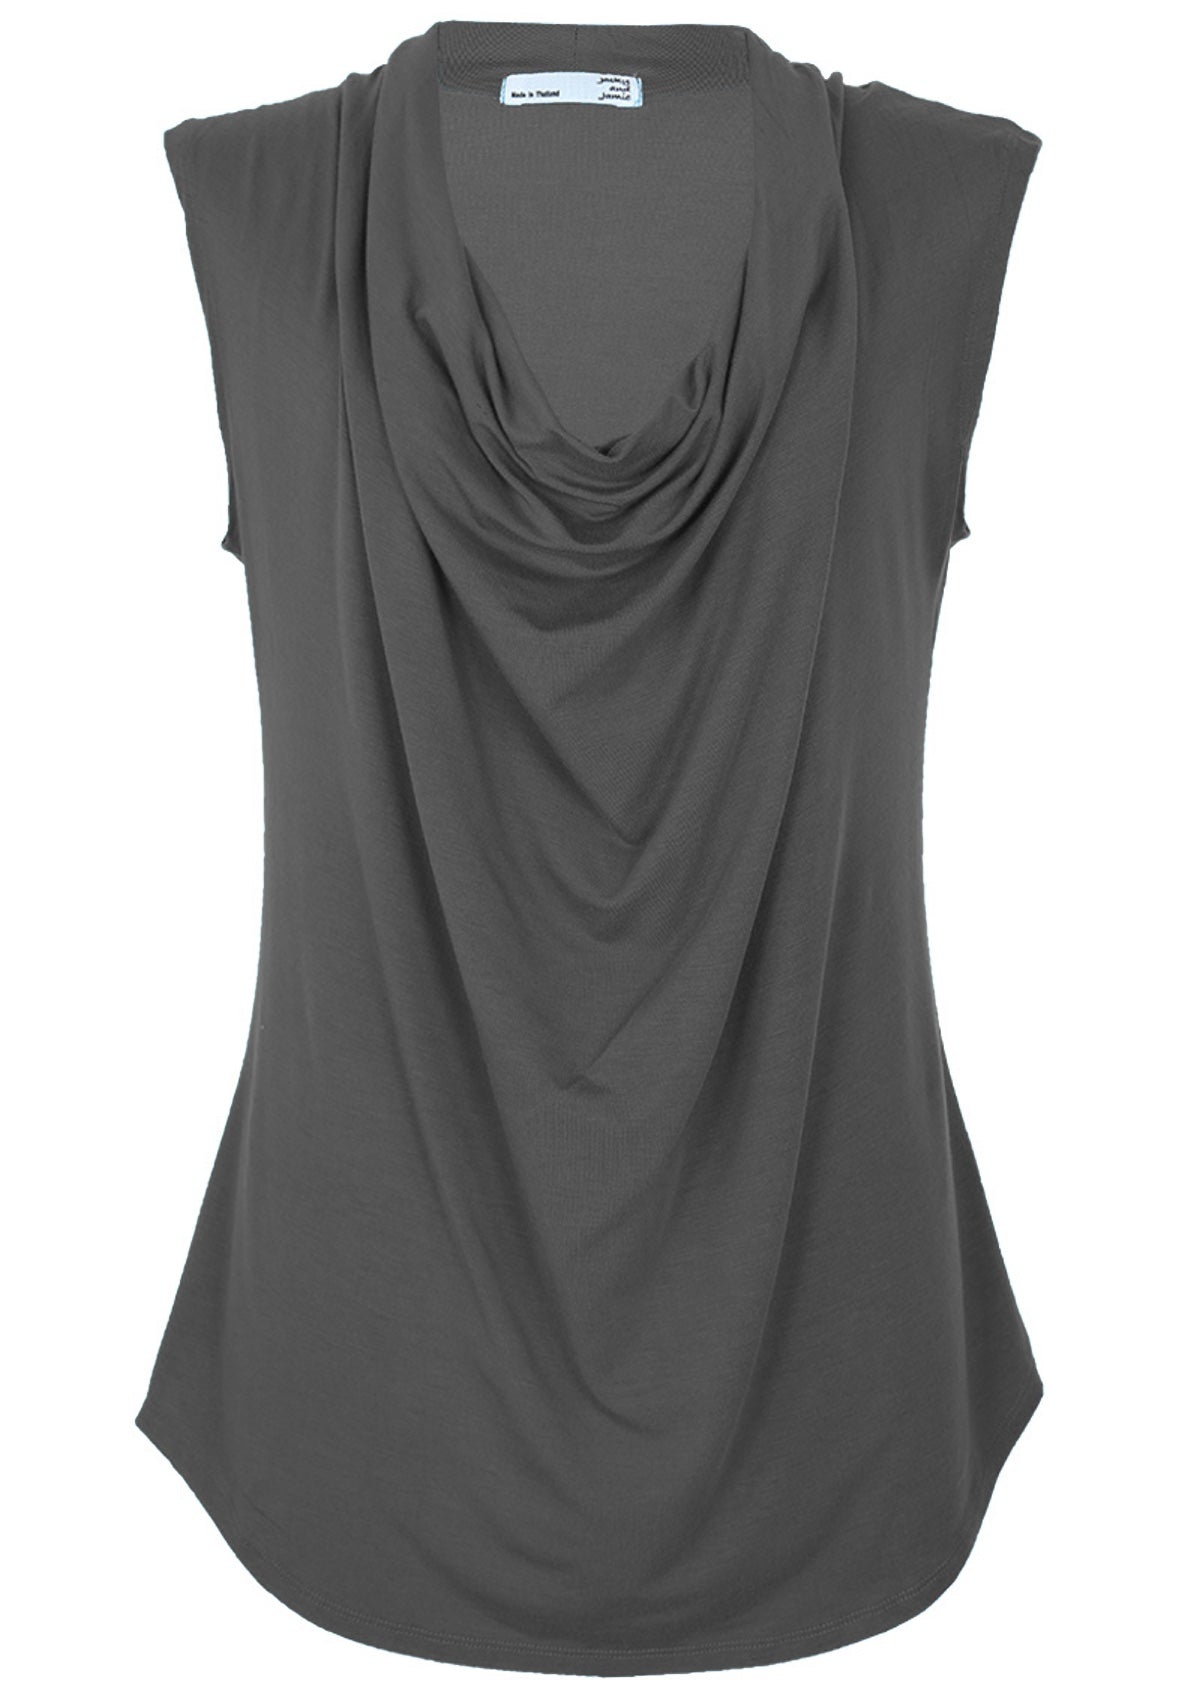 Front view loose fit cowl neck women's top grey